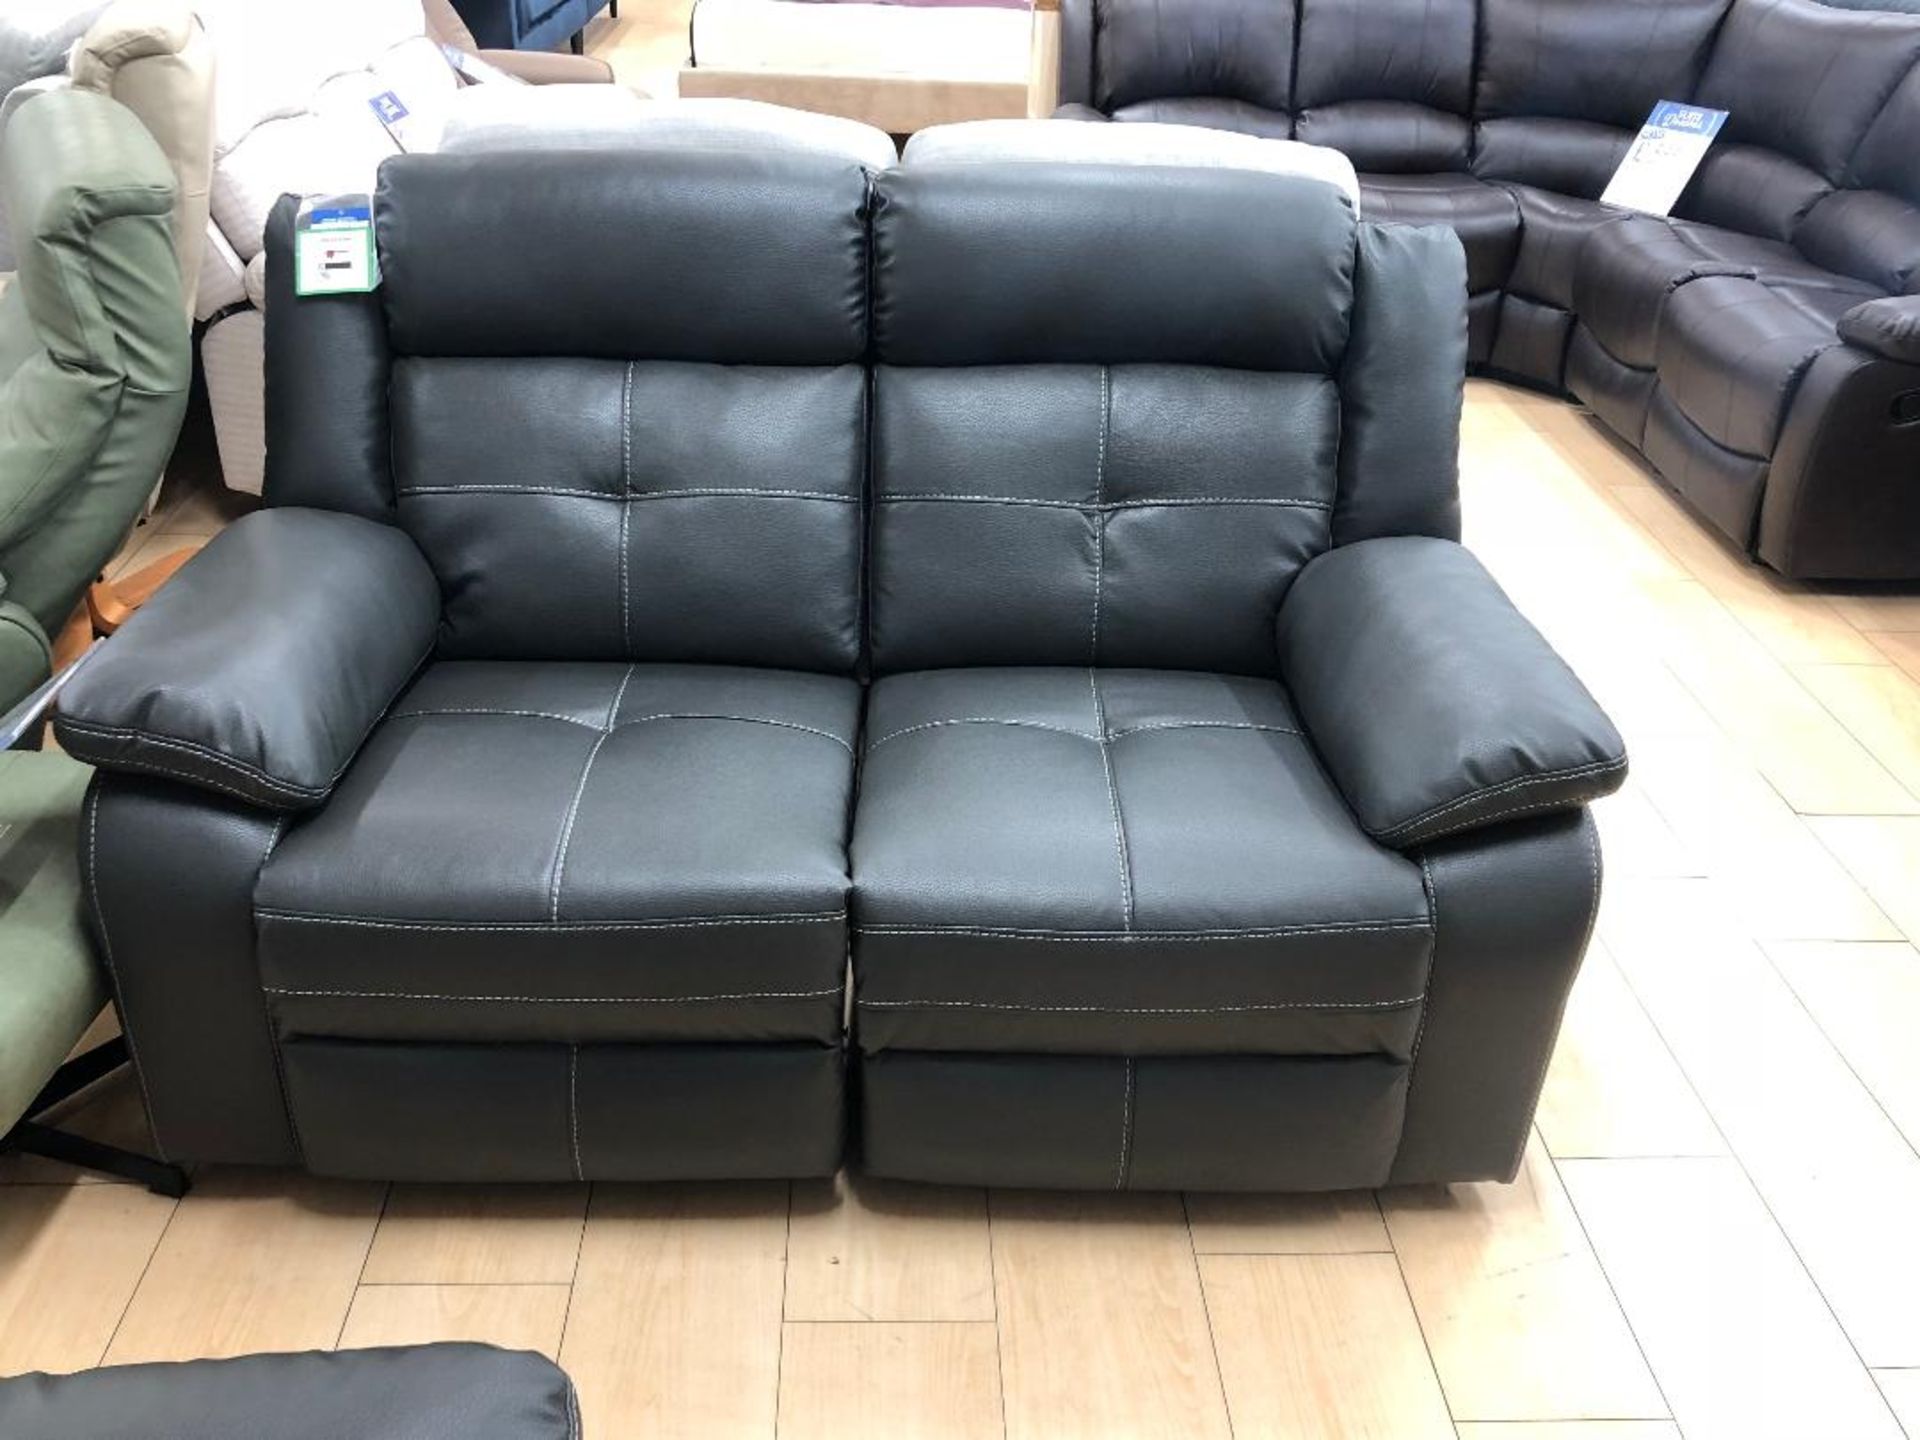 Brand new boxed Langdale 3 seater plus 2 seater reclining sofas in black leather - Image 2 of 2